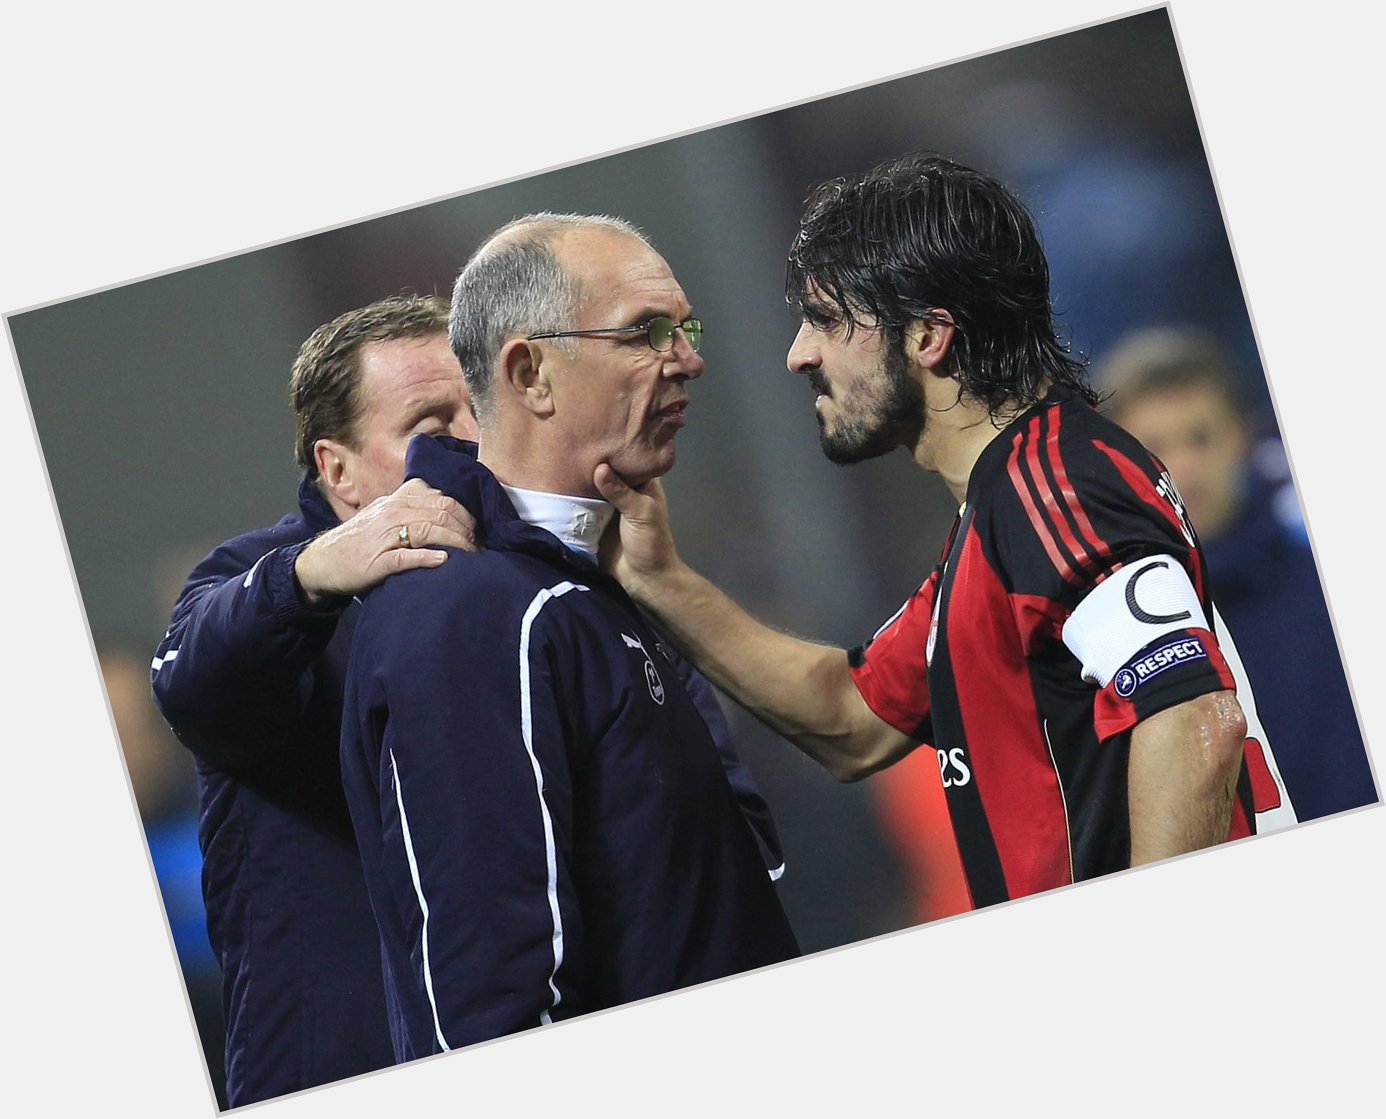 Happy 37th birthday to Gennaro Gattuso today. He won the Champions League (2), Serie A (2) and the 2006 World Cup. 